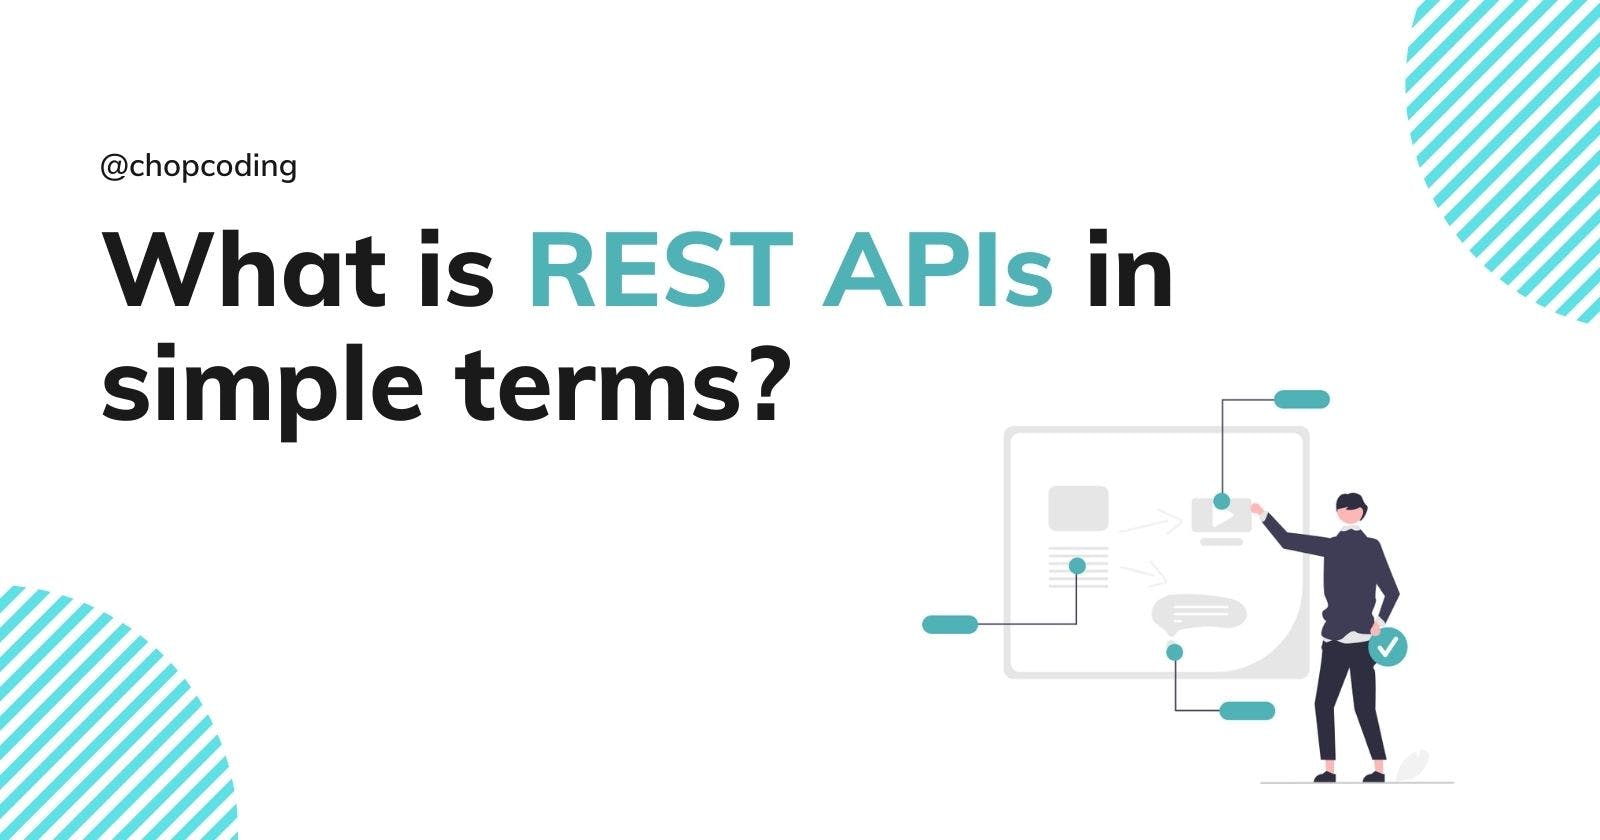 What is REST APIs in simple terms